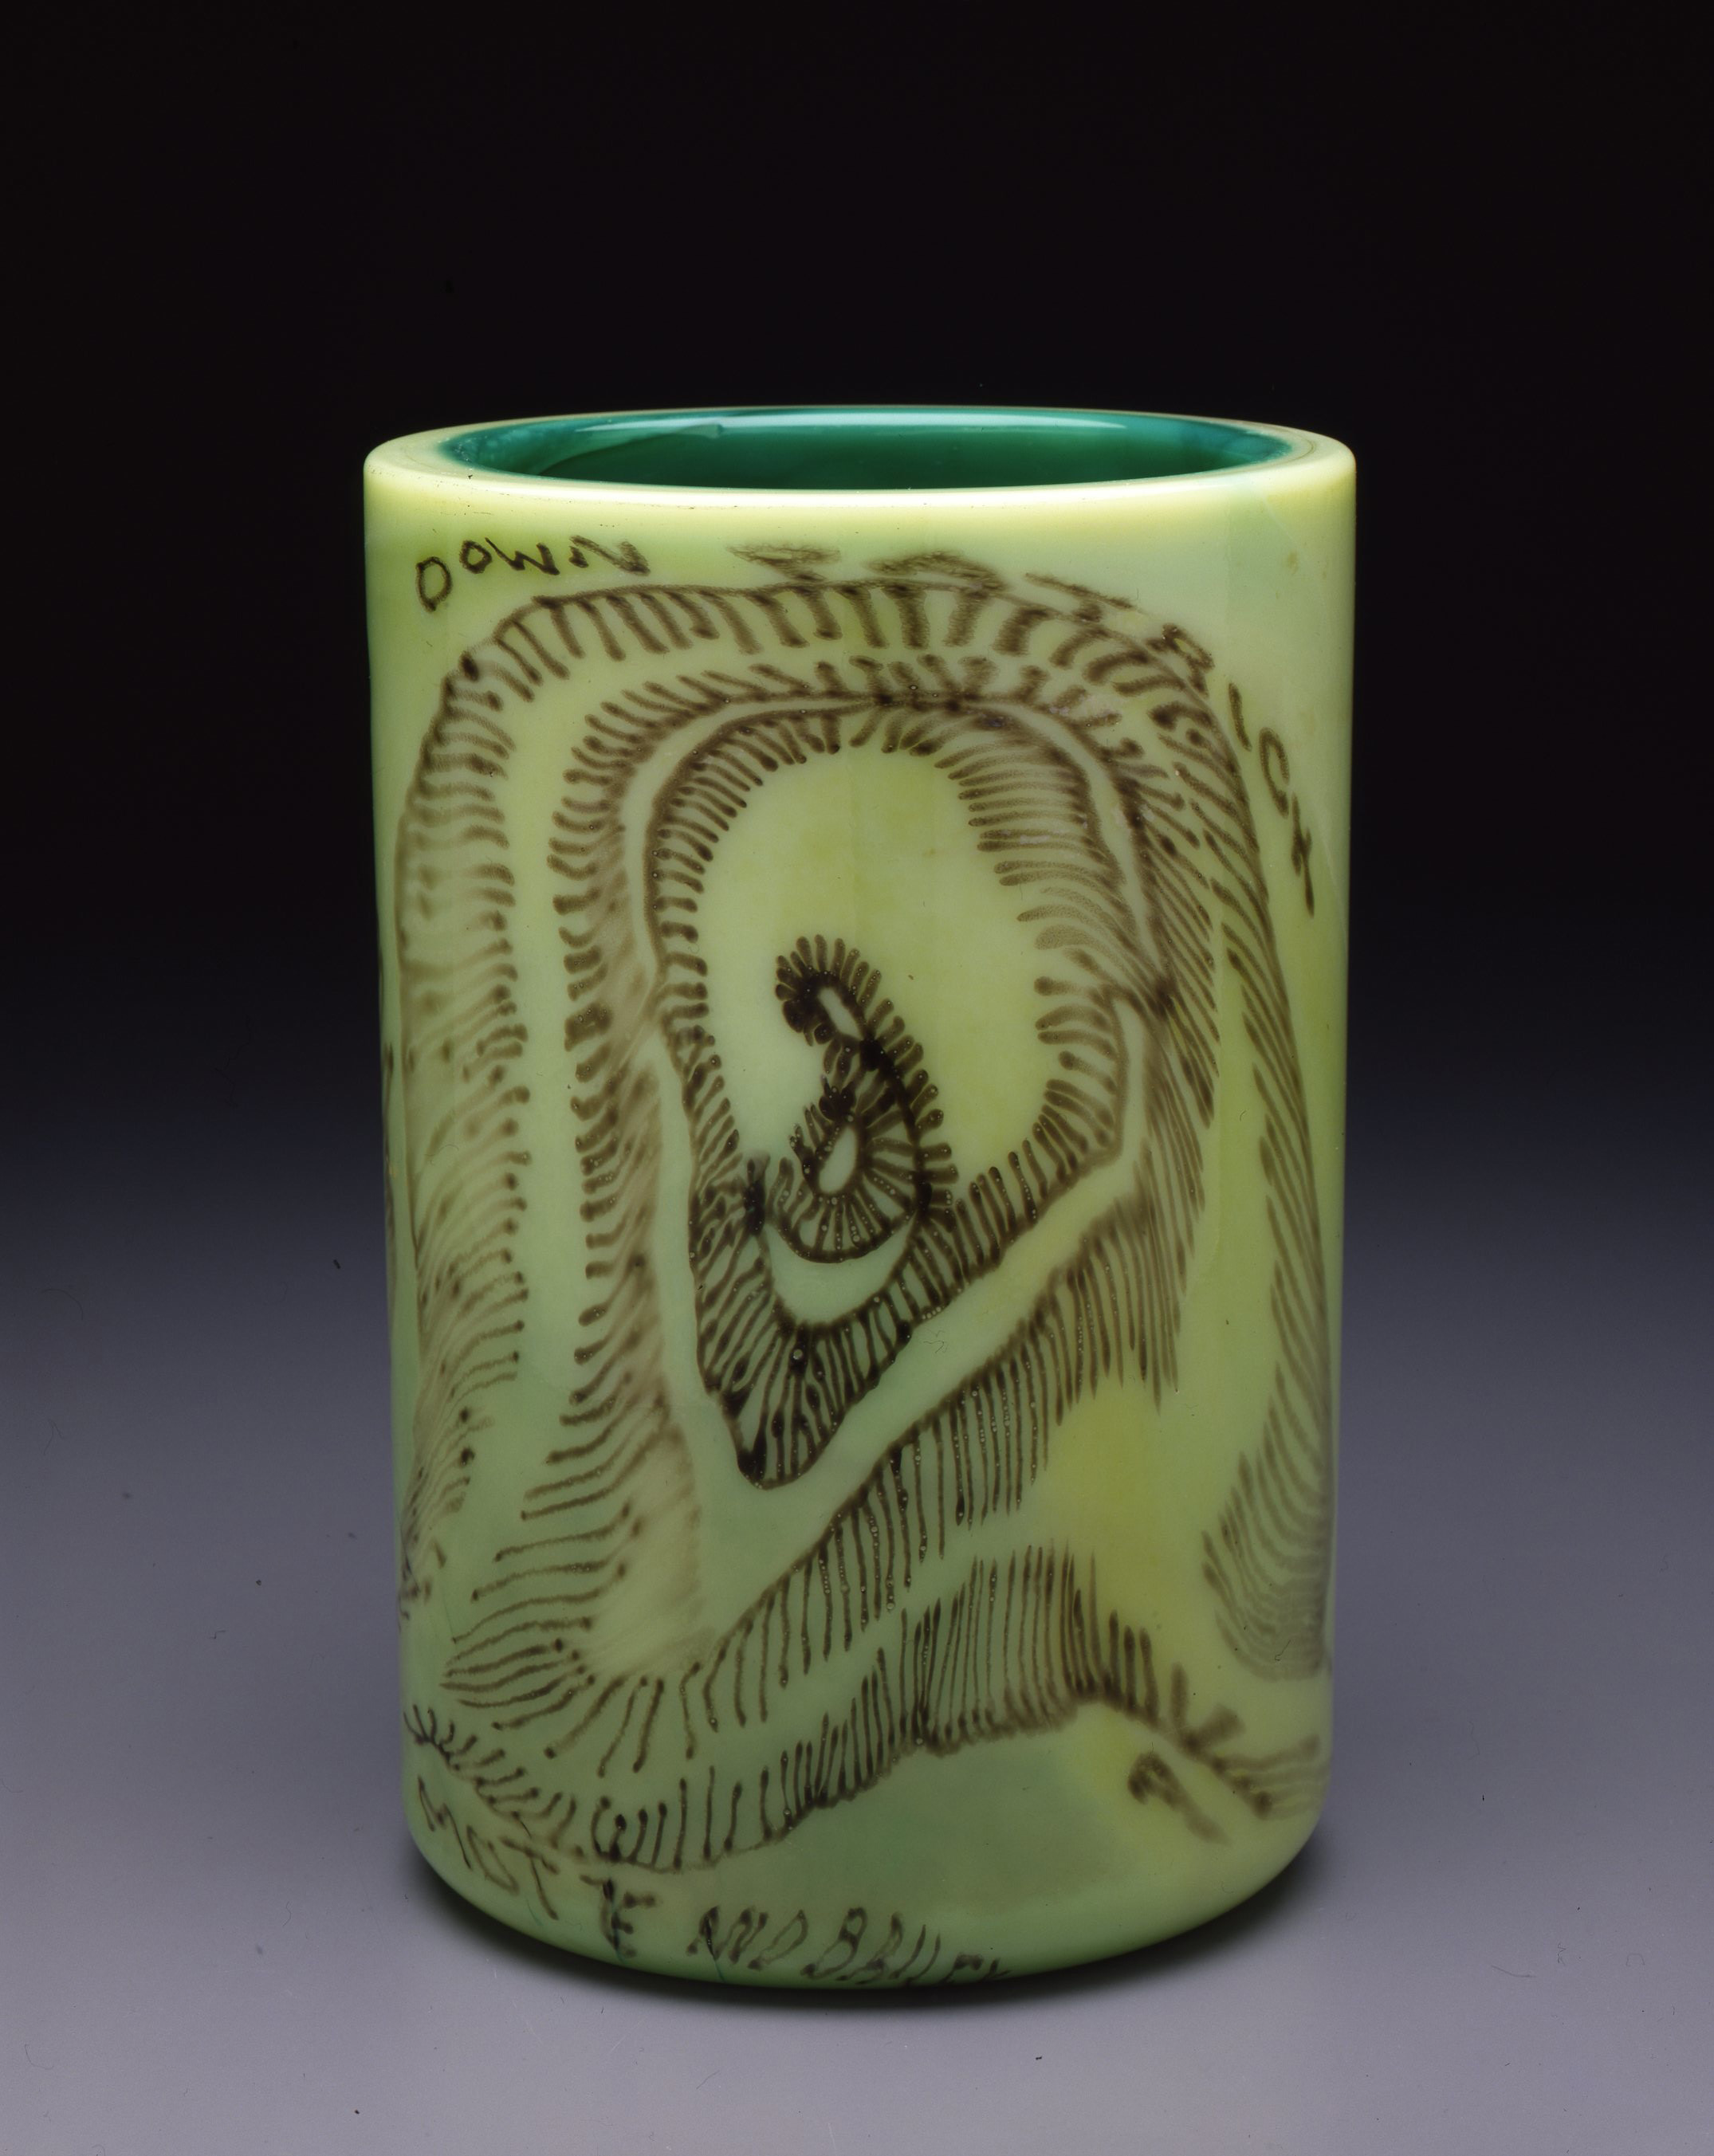  Dale Chihuly,  Irish Cylinder #5  &nbsp;(1975, glass, 11 1/2 x 7 1/2 inches), DC.267 